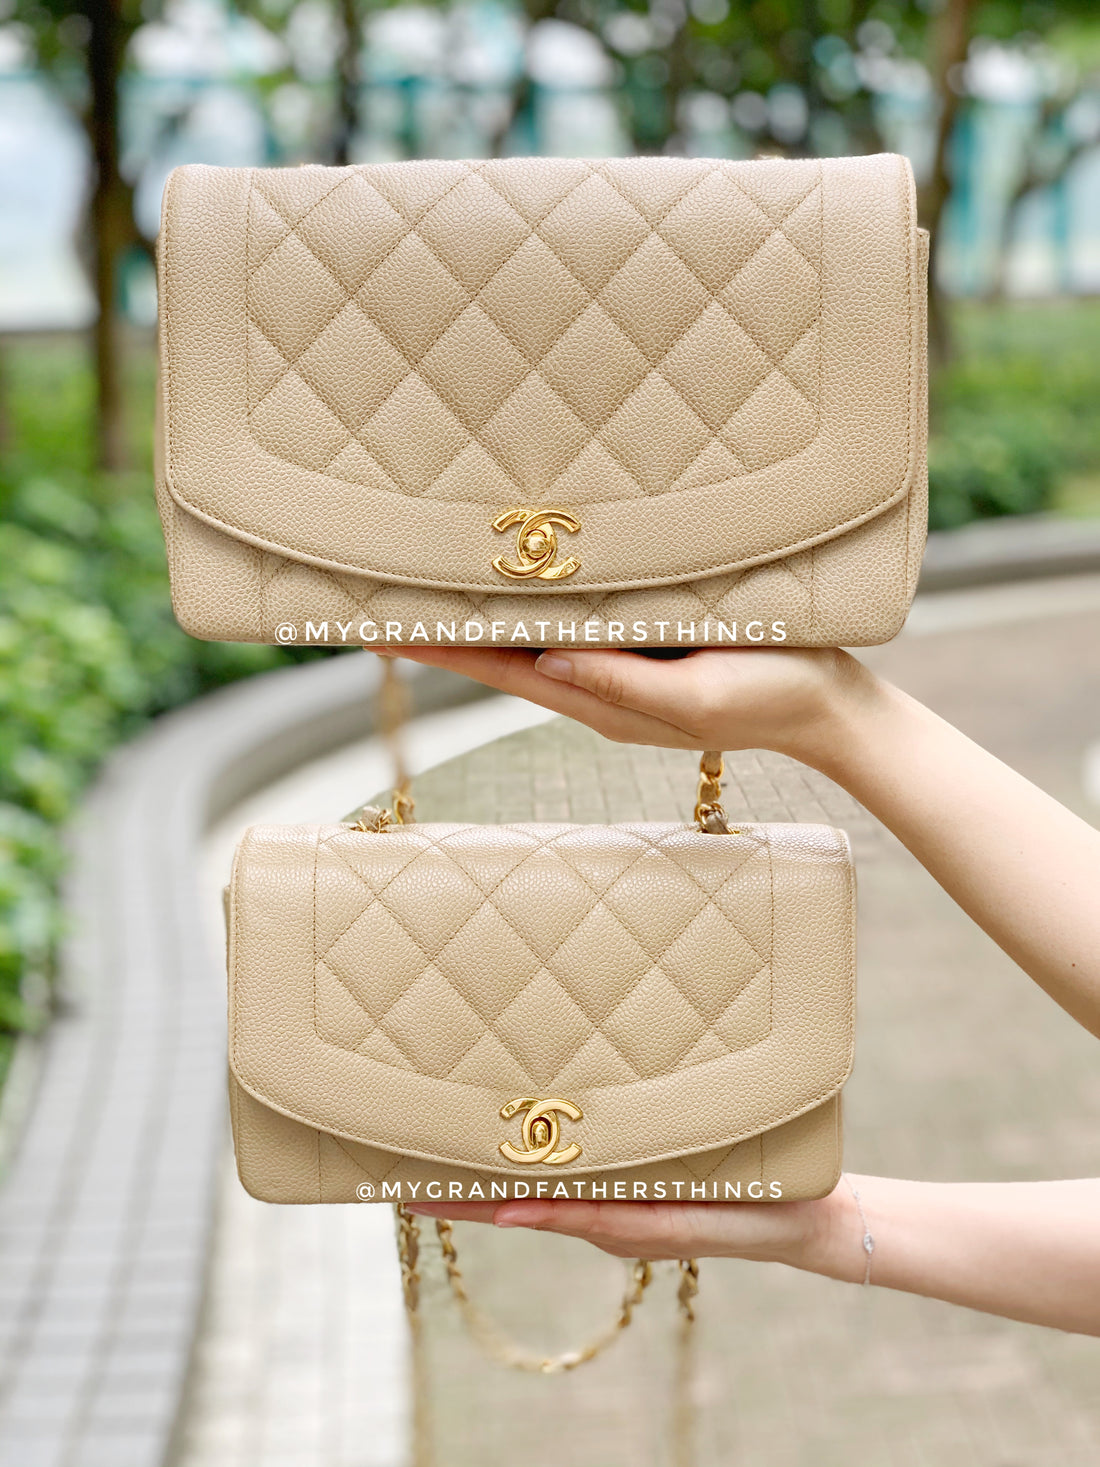 Designer Handbag Review  Chanel Small Lambskin Diana and Purchasing  Experience  The Lust Listt